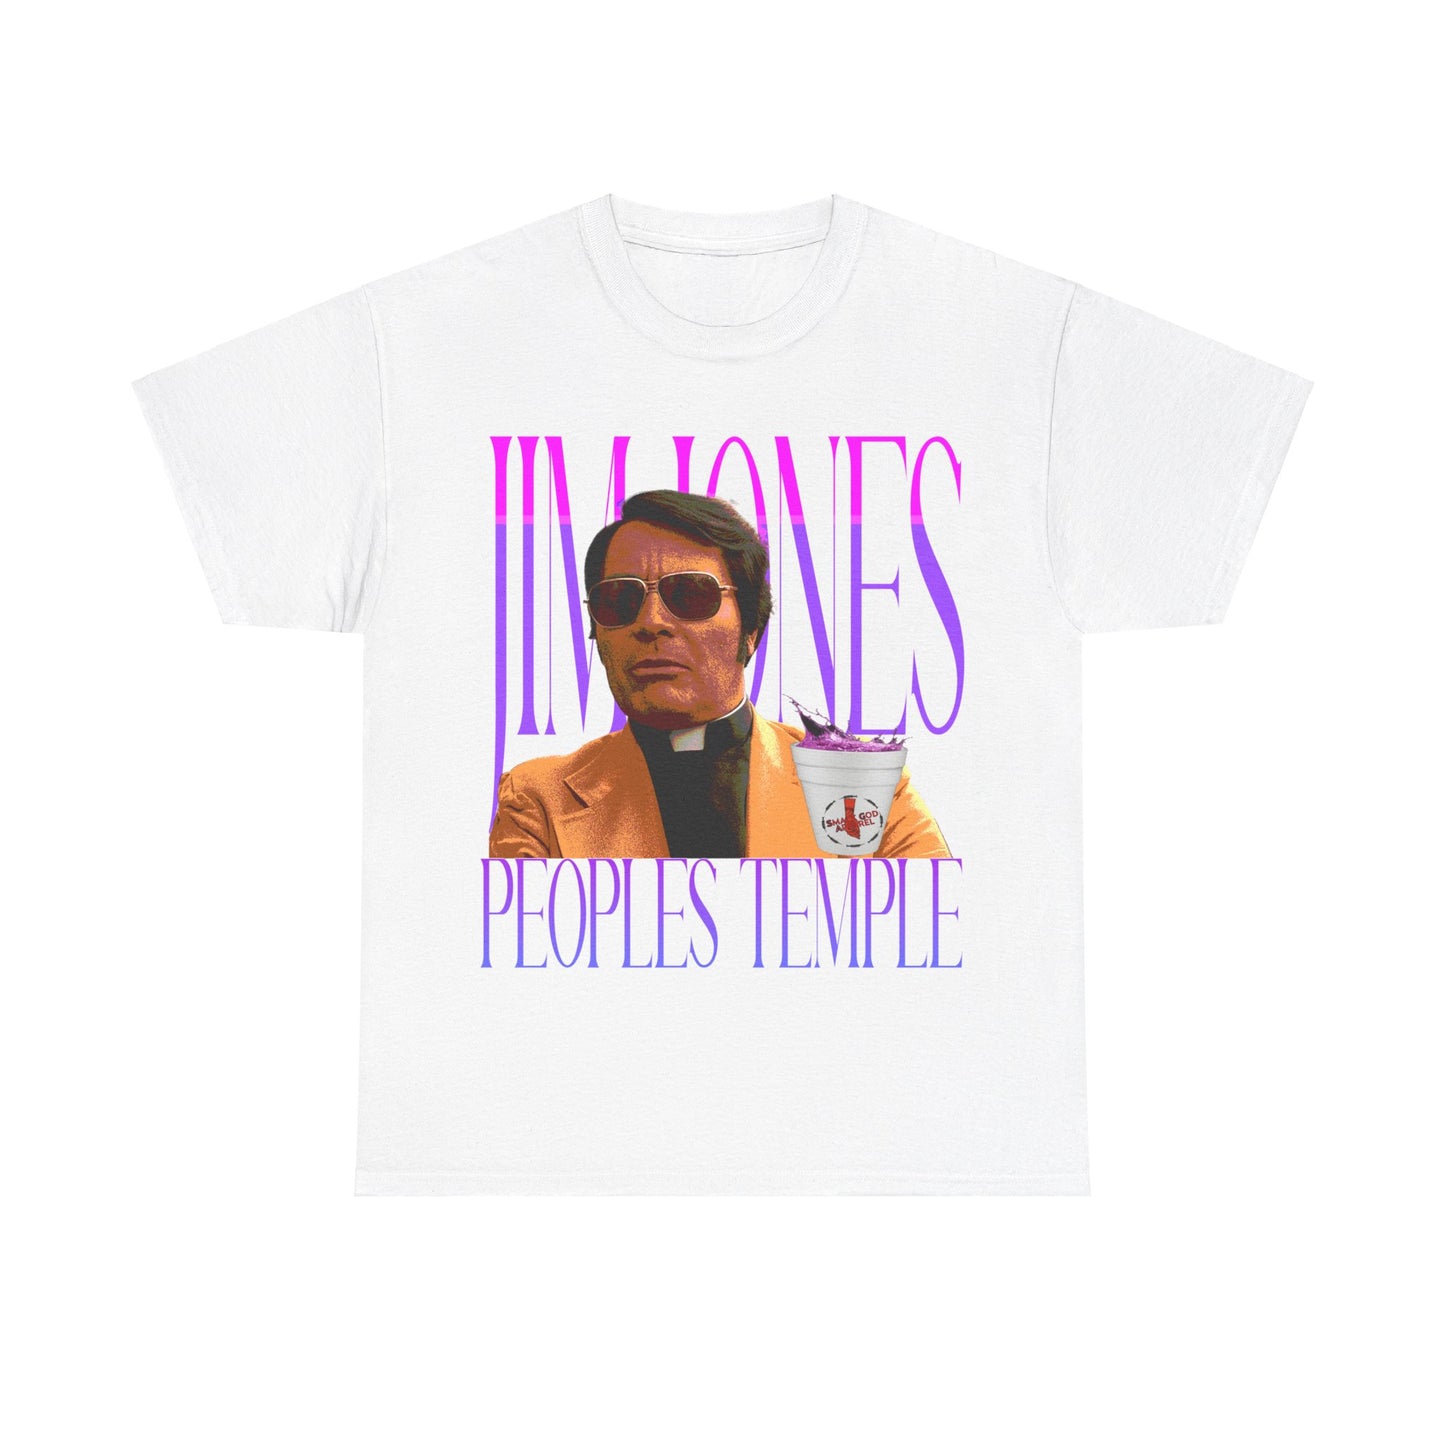 "Jim Jones T-Shirt with a compelling graphic design, available from Smack God Apparel."